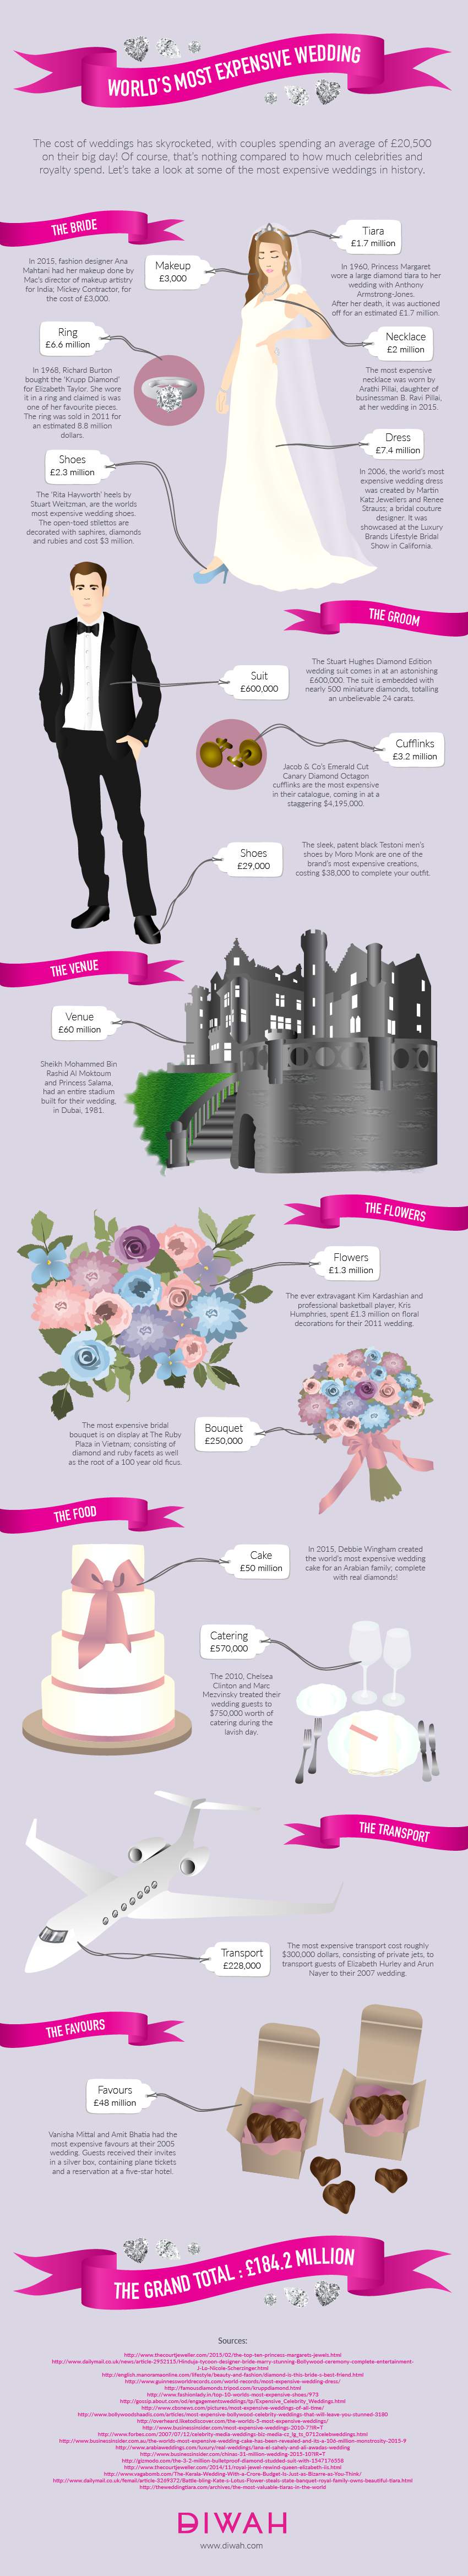 anatomy-of-historys-most-expensive-wedding